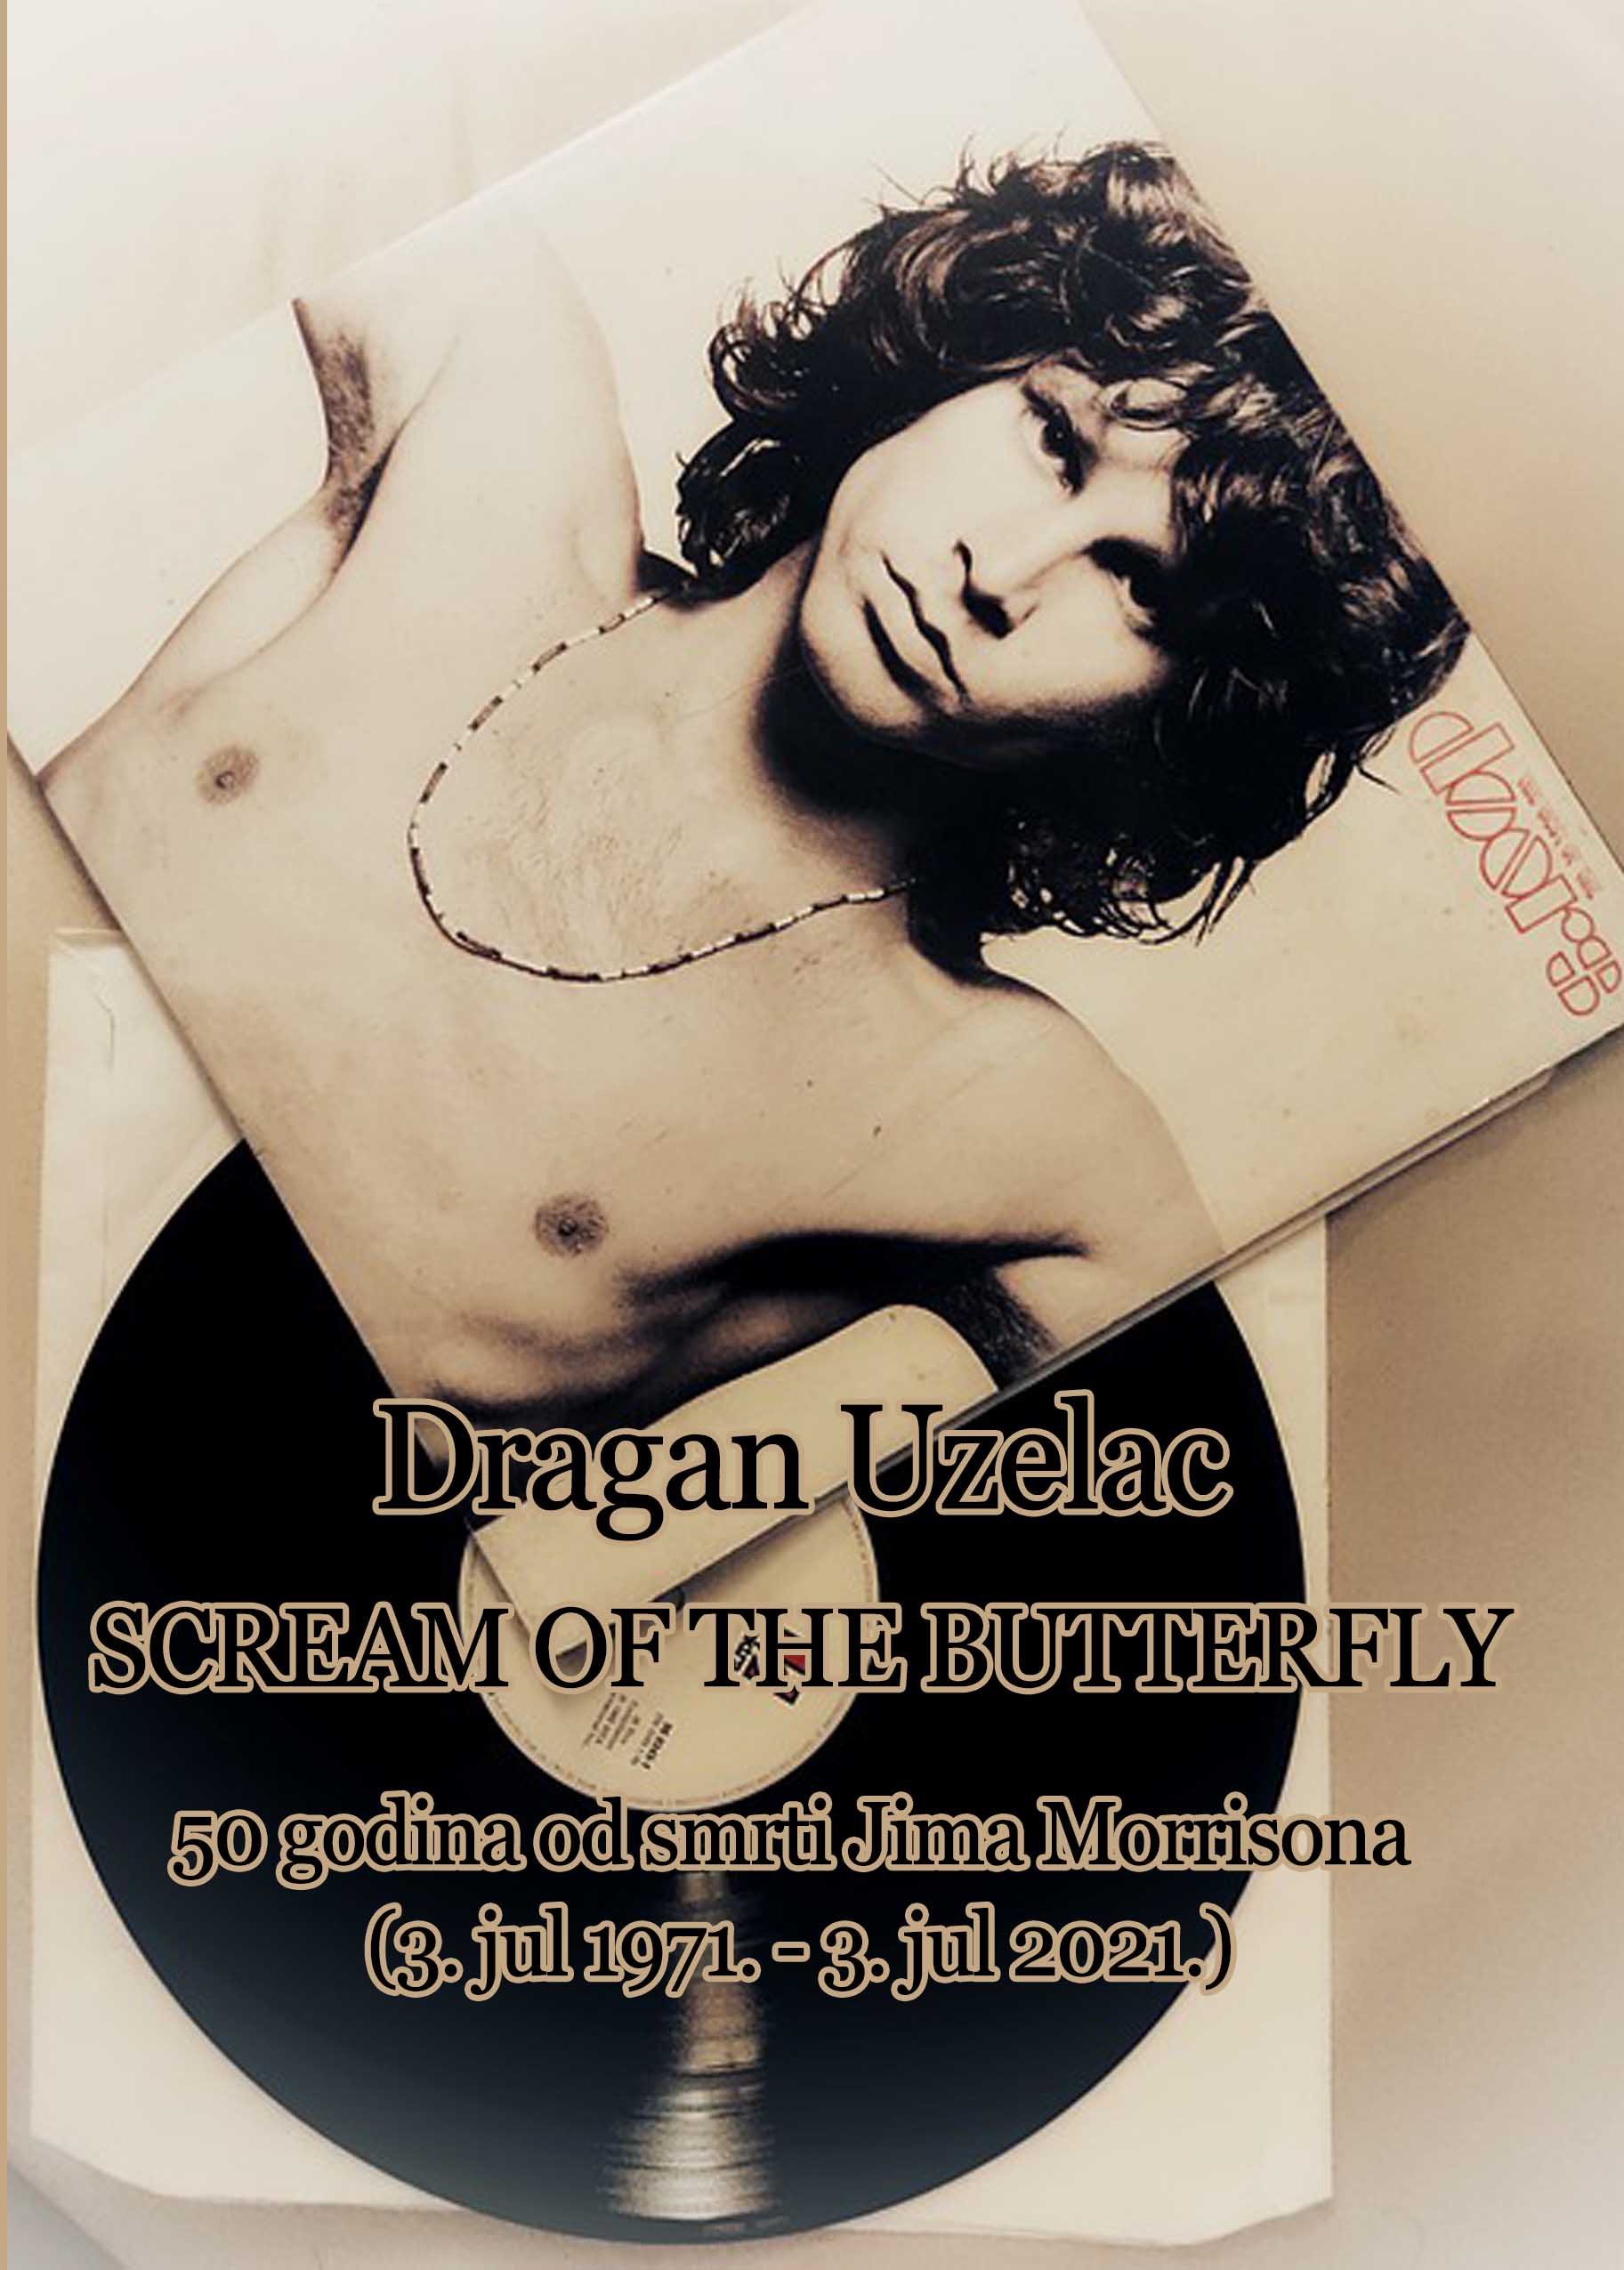 Dragan Uzelac: SCREAM OF THE BUTTERFLY